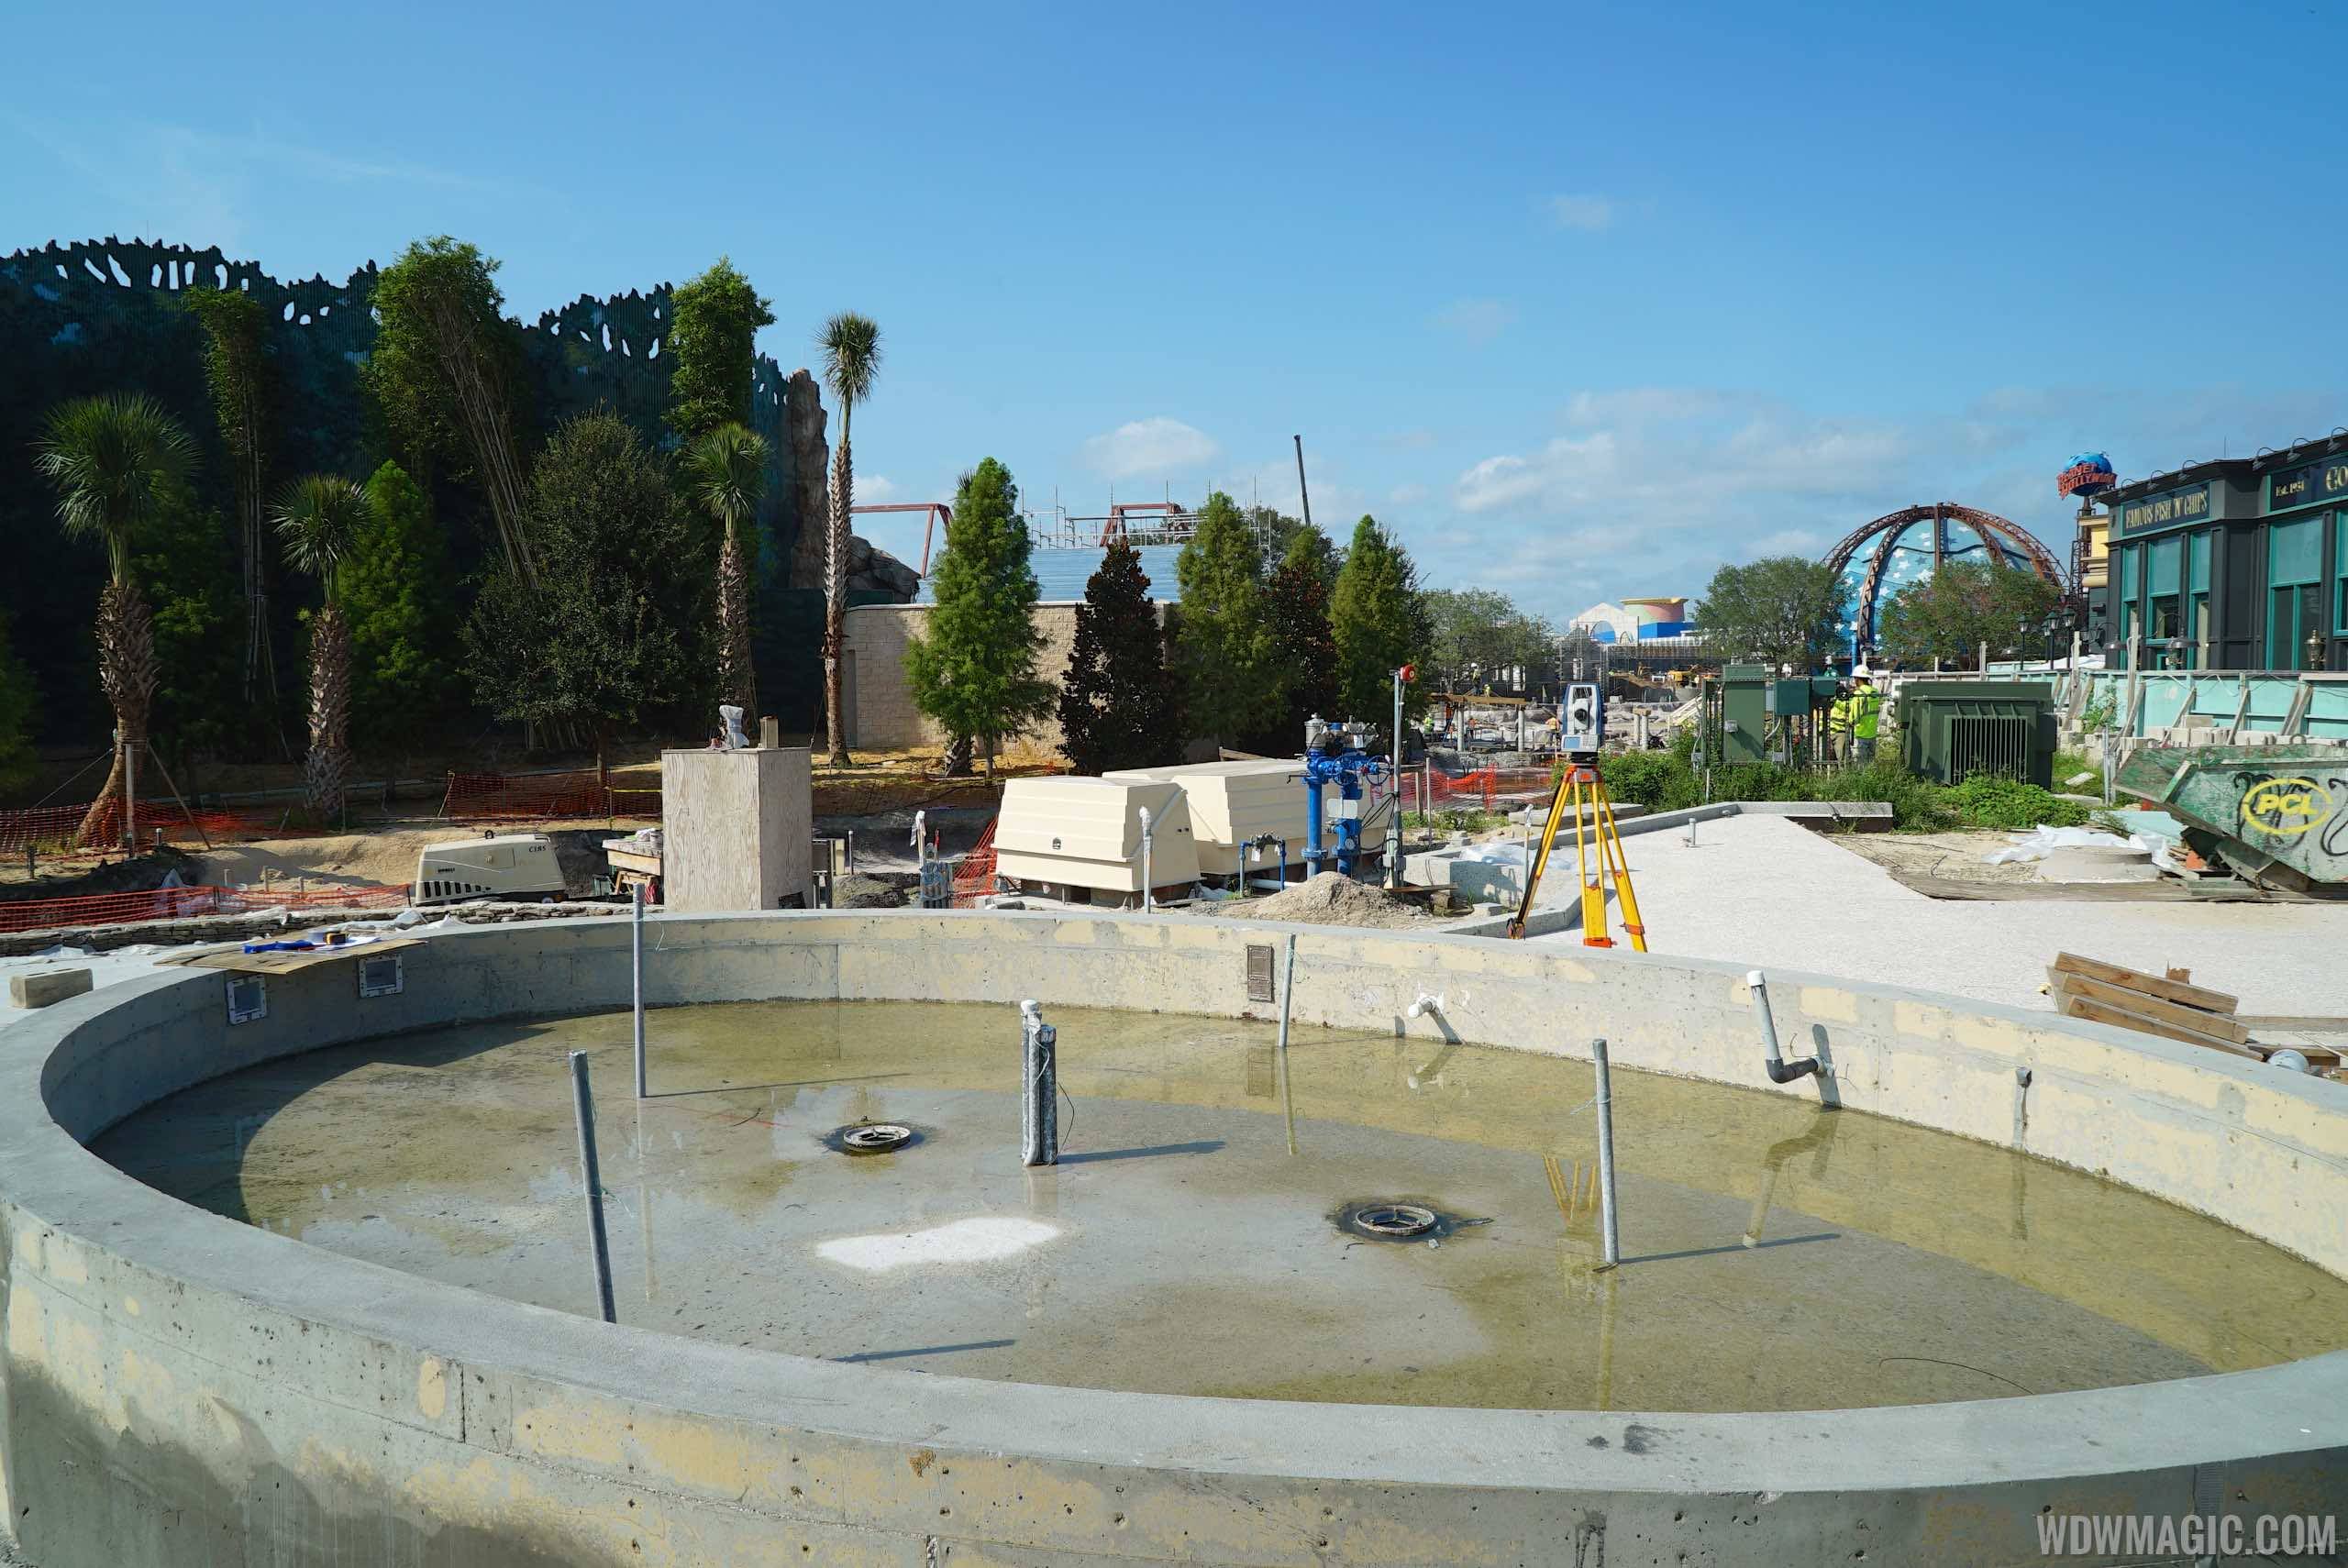 The Springs construction